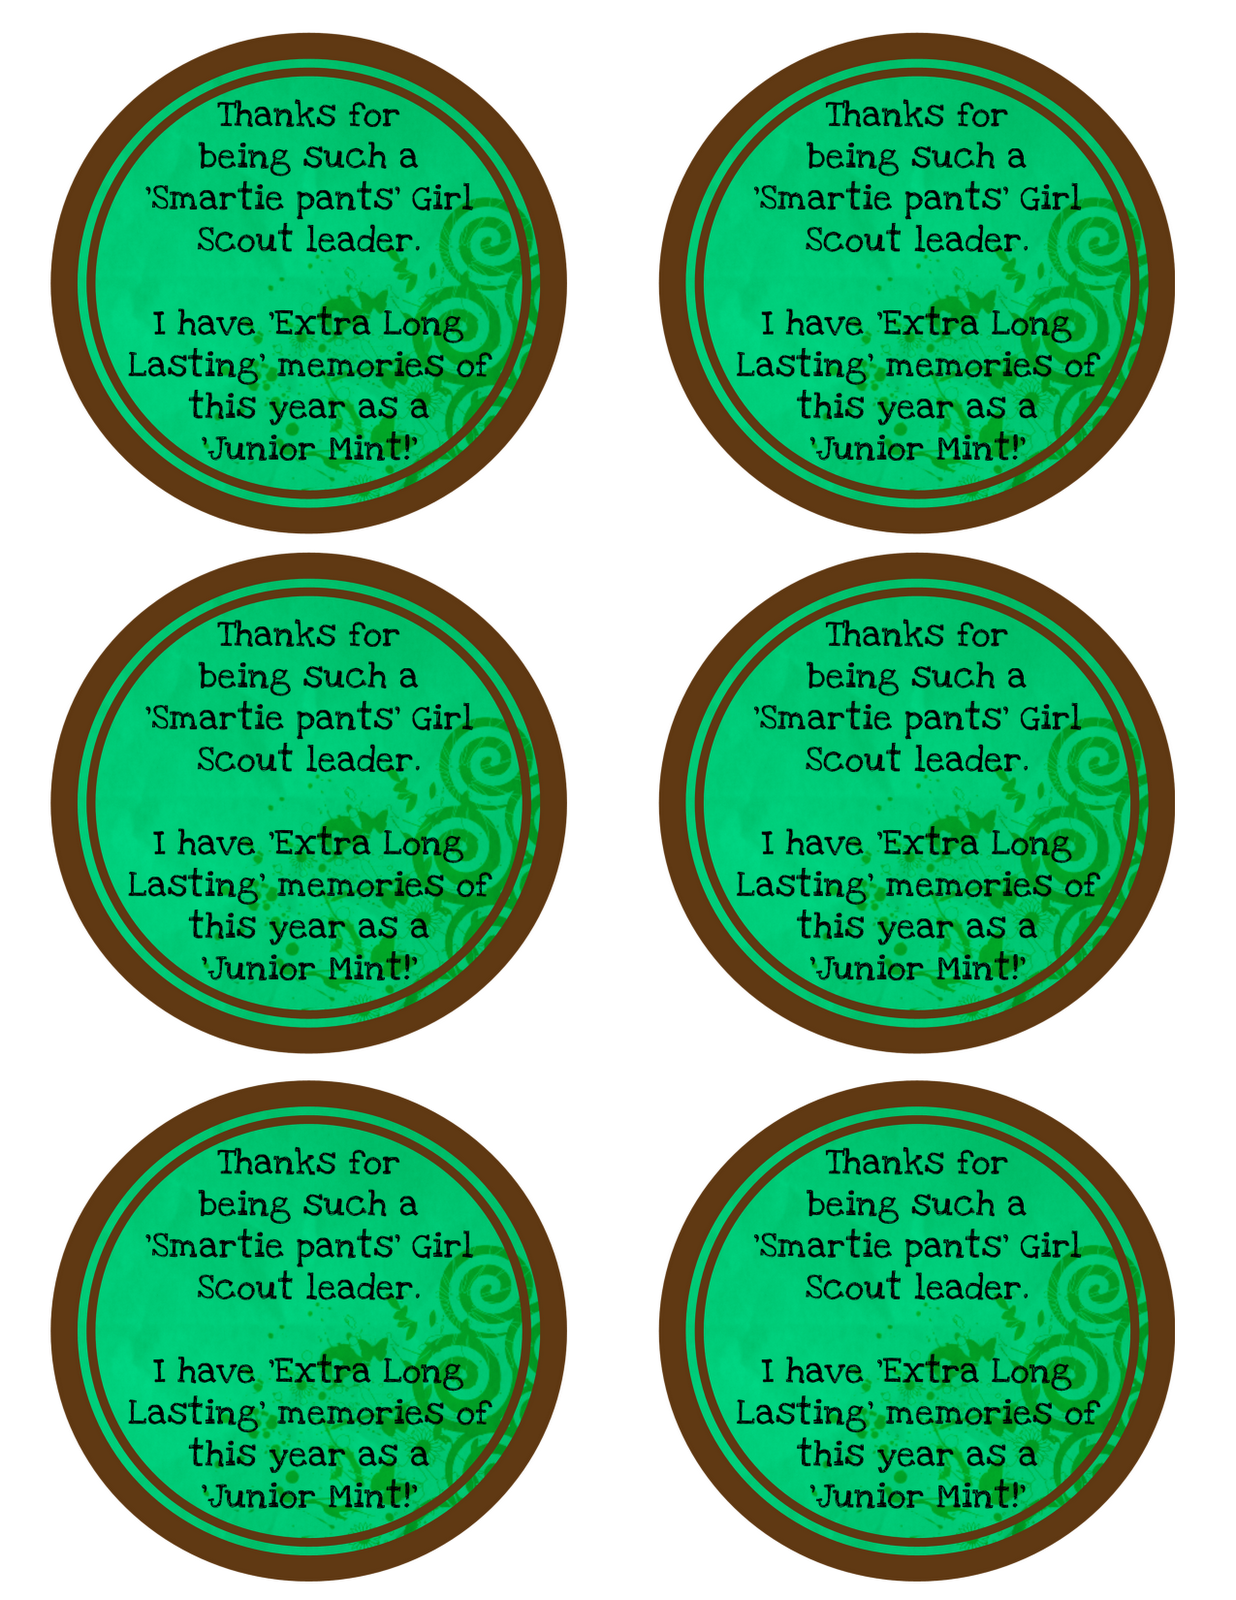 Teacher and Girl Scout Leader Gifts (Free Printable) - The Real ...